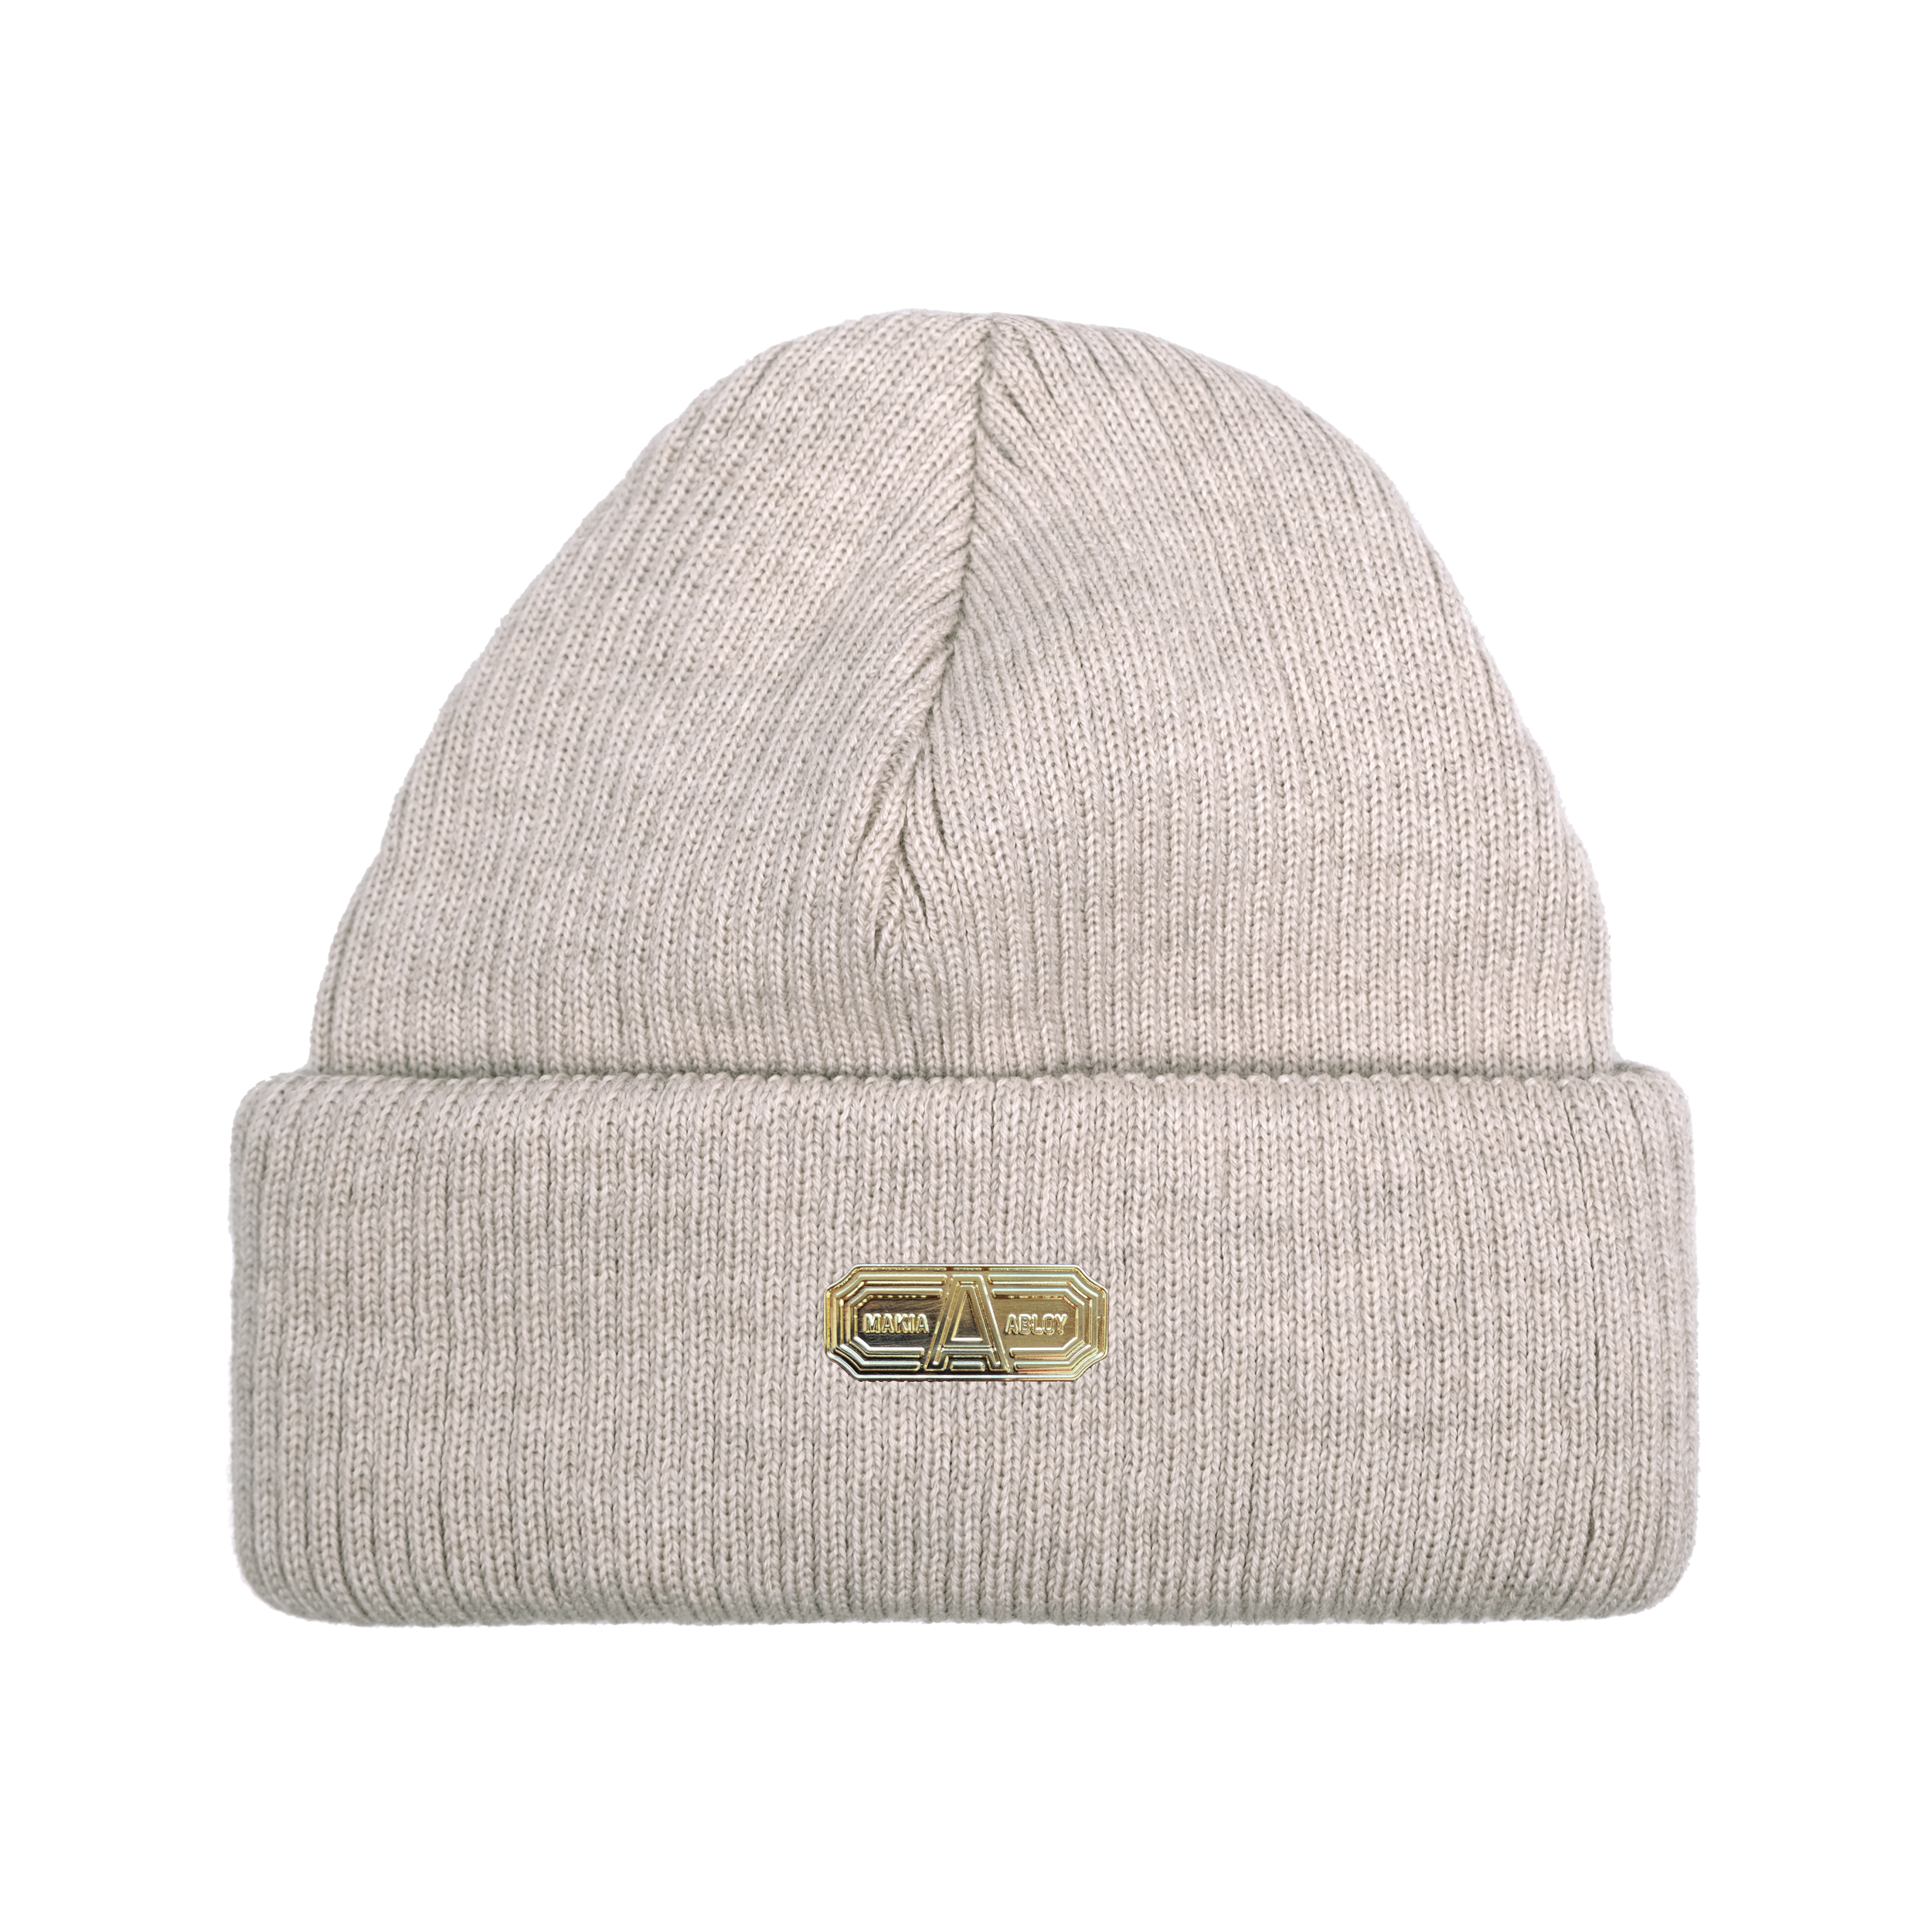 Ribbed Merino wool beanie with Collaboration branding.